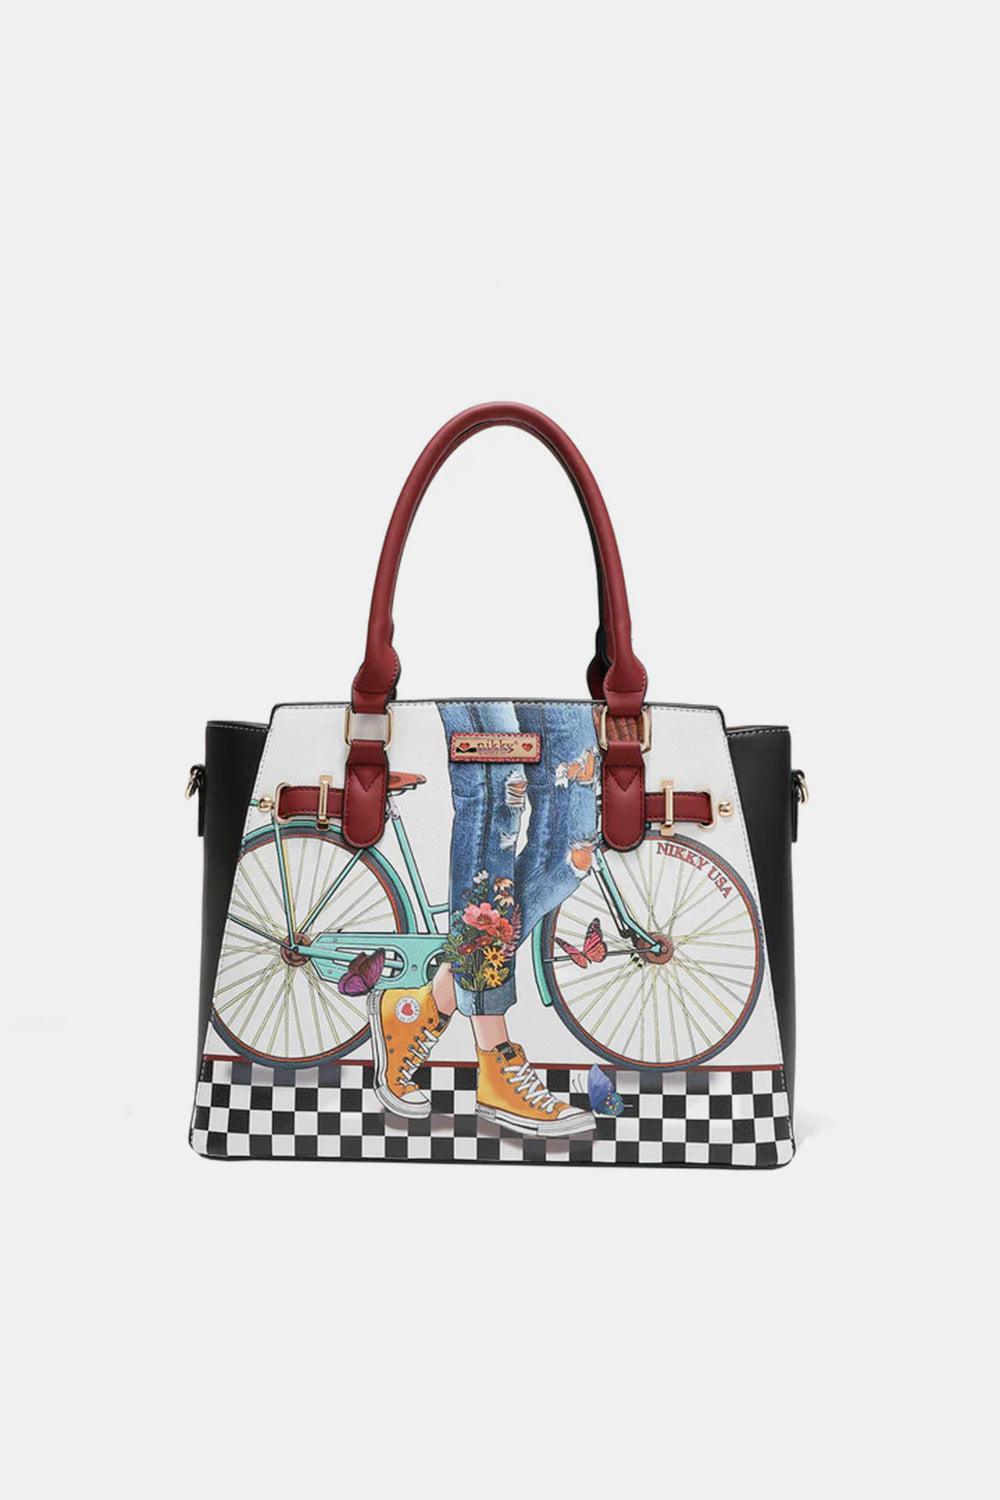 a handbag with a picture of a man on a bike